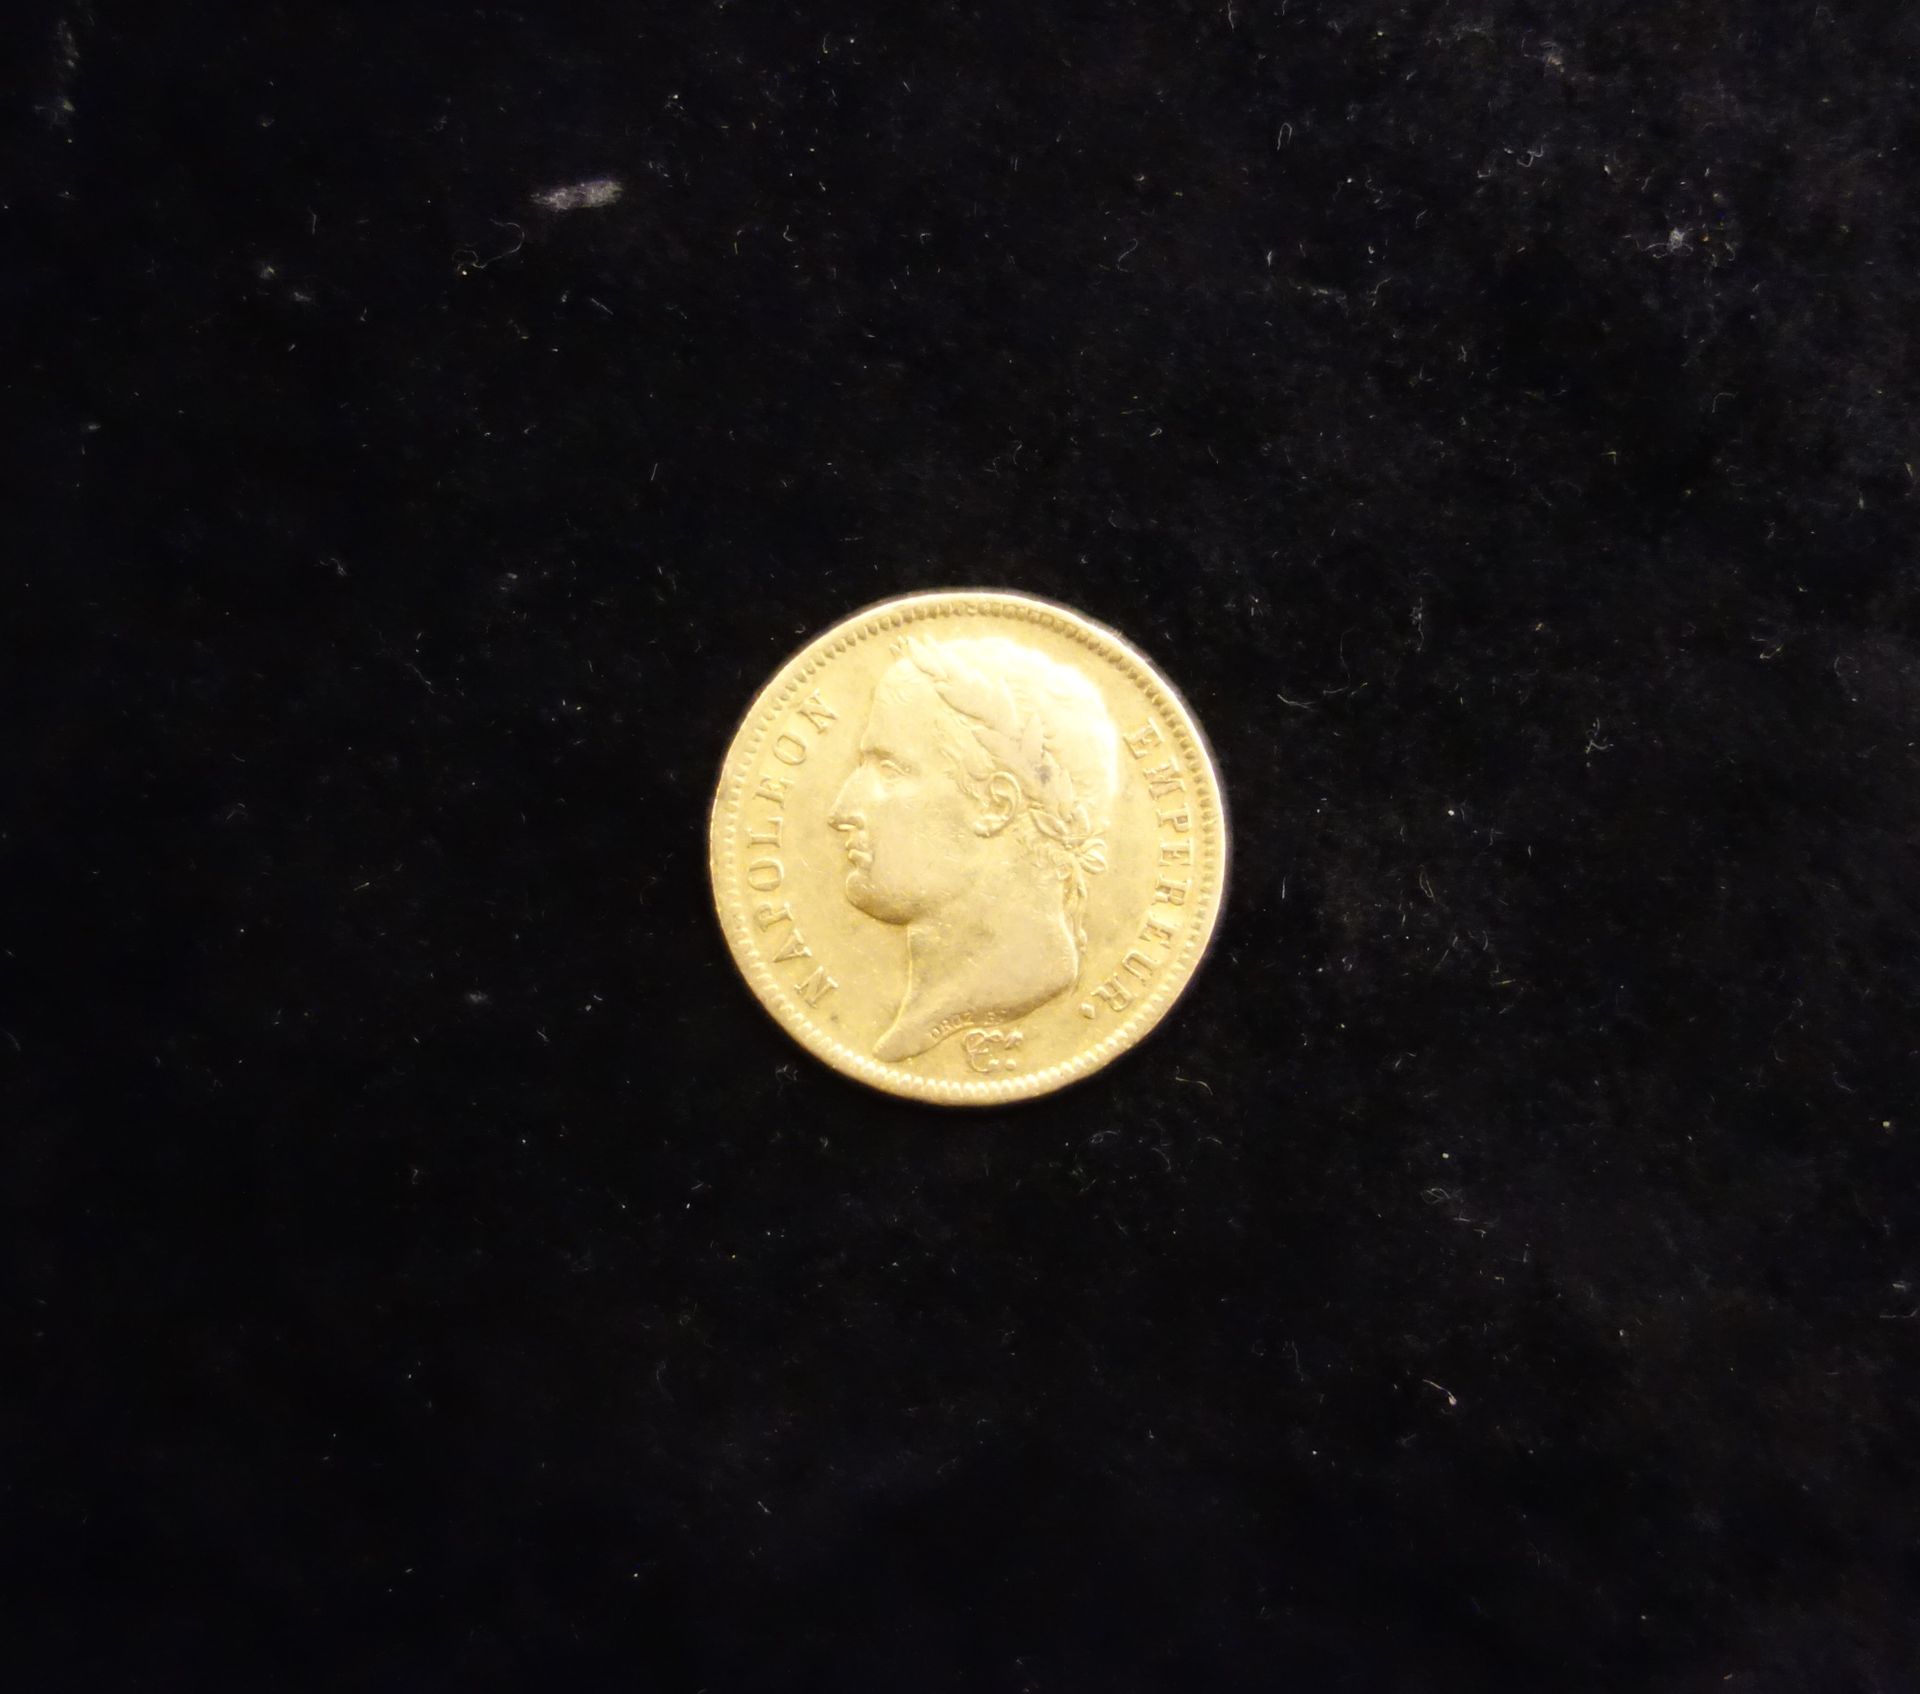 Null 40 Francs gold coin, 1812.
Weight: 12,8 g